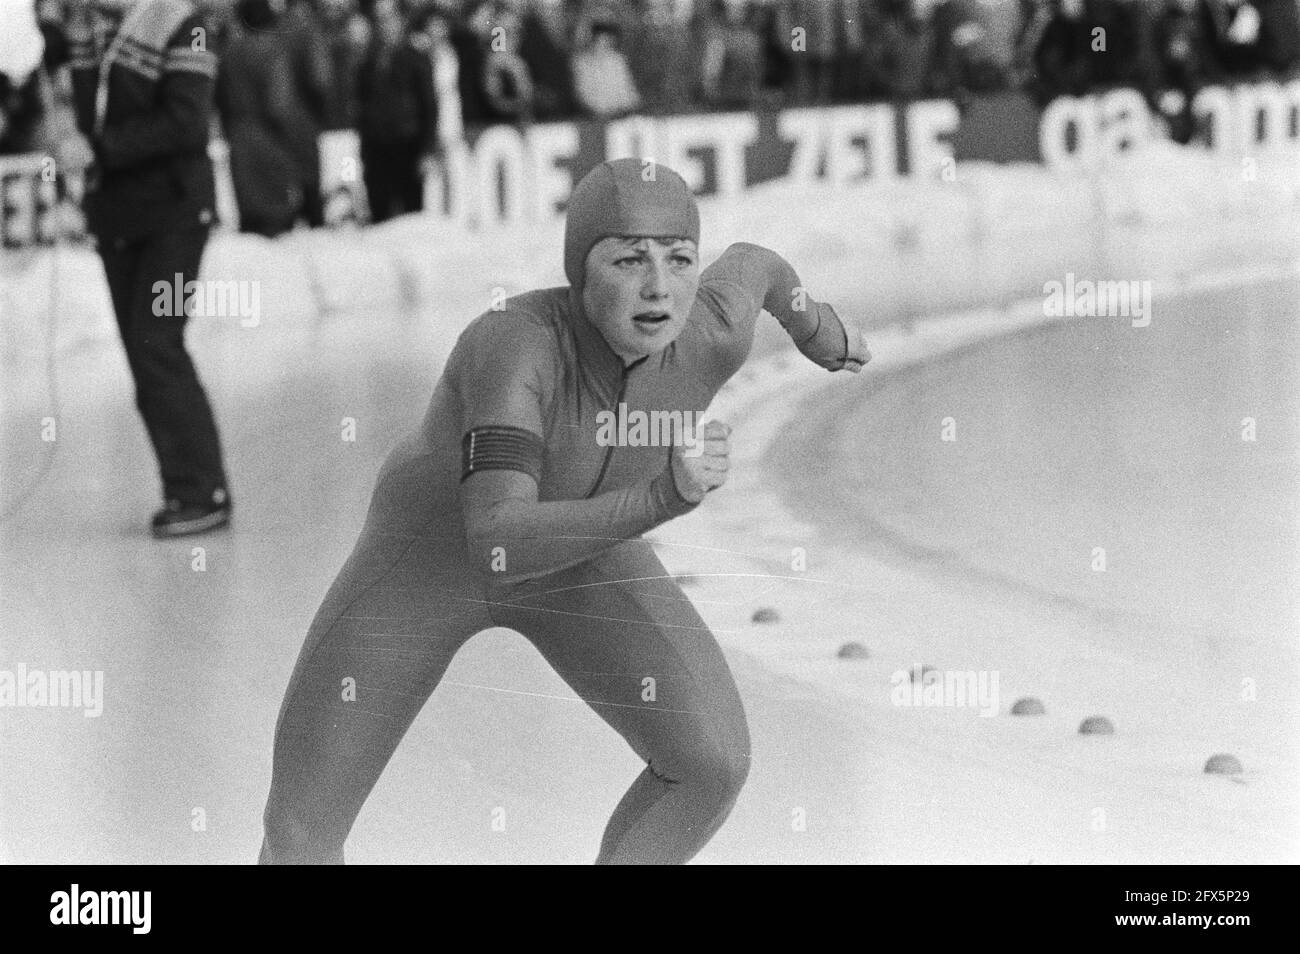 World speed skating championships ladies allround in The Hague. Ria Visser in action., February 3, 1979, skating, sports, The Netherlands, 20th century press agency photo, news to remember, documentary, historic photography 1945-1990, visual stories, human history of the Twentieth Century, capturing moments in time Stock Photo